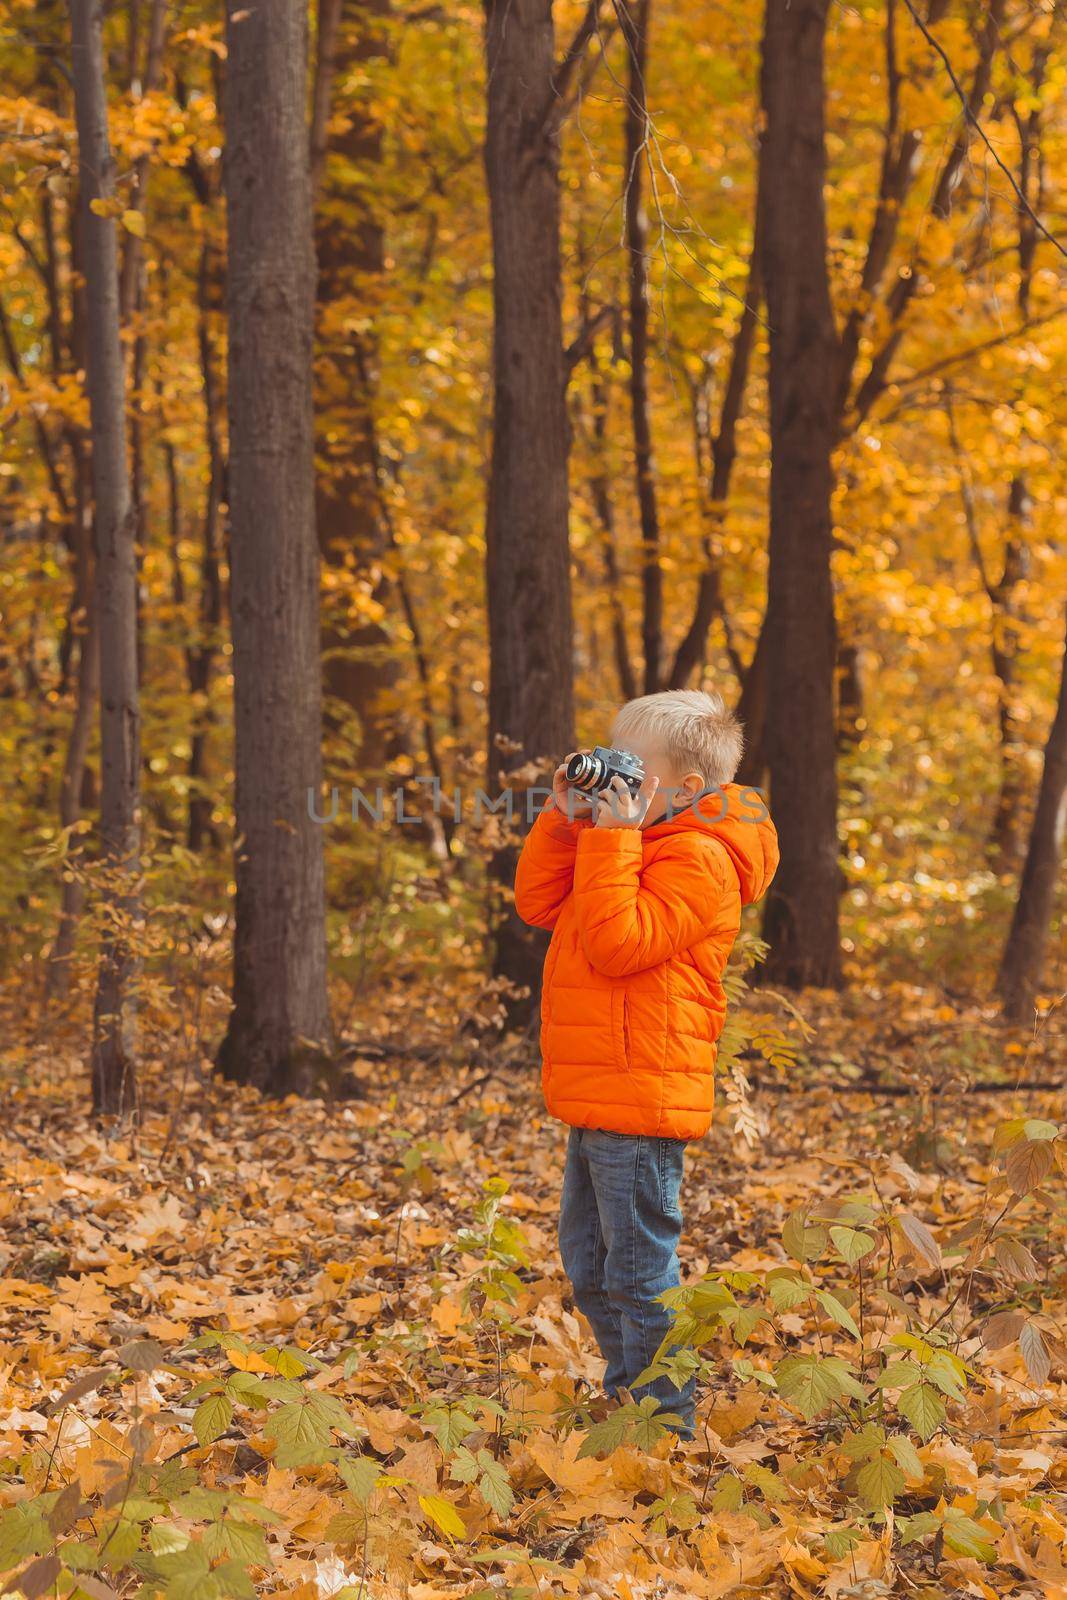 Boy with retro camera taking pictures outdoor in autumn nature. Leisure and photographers concept.